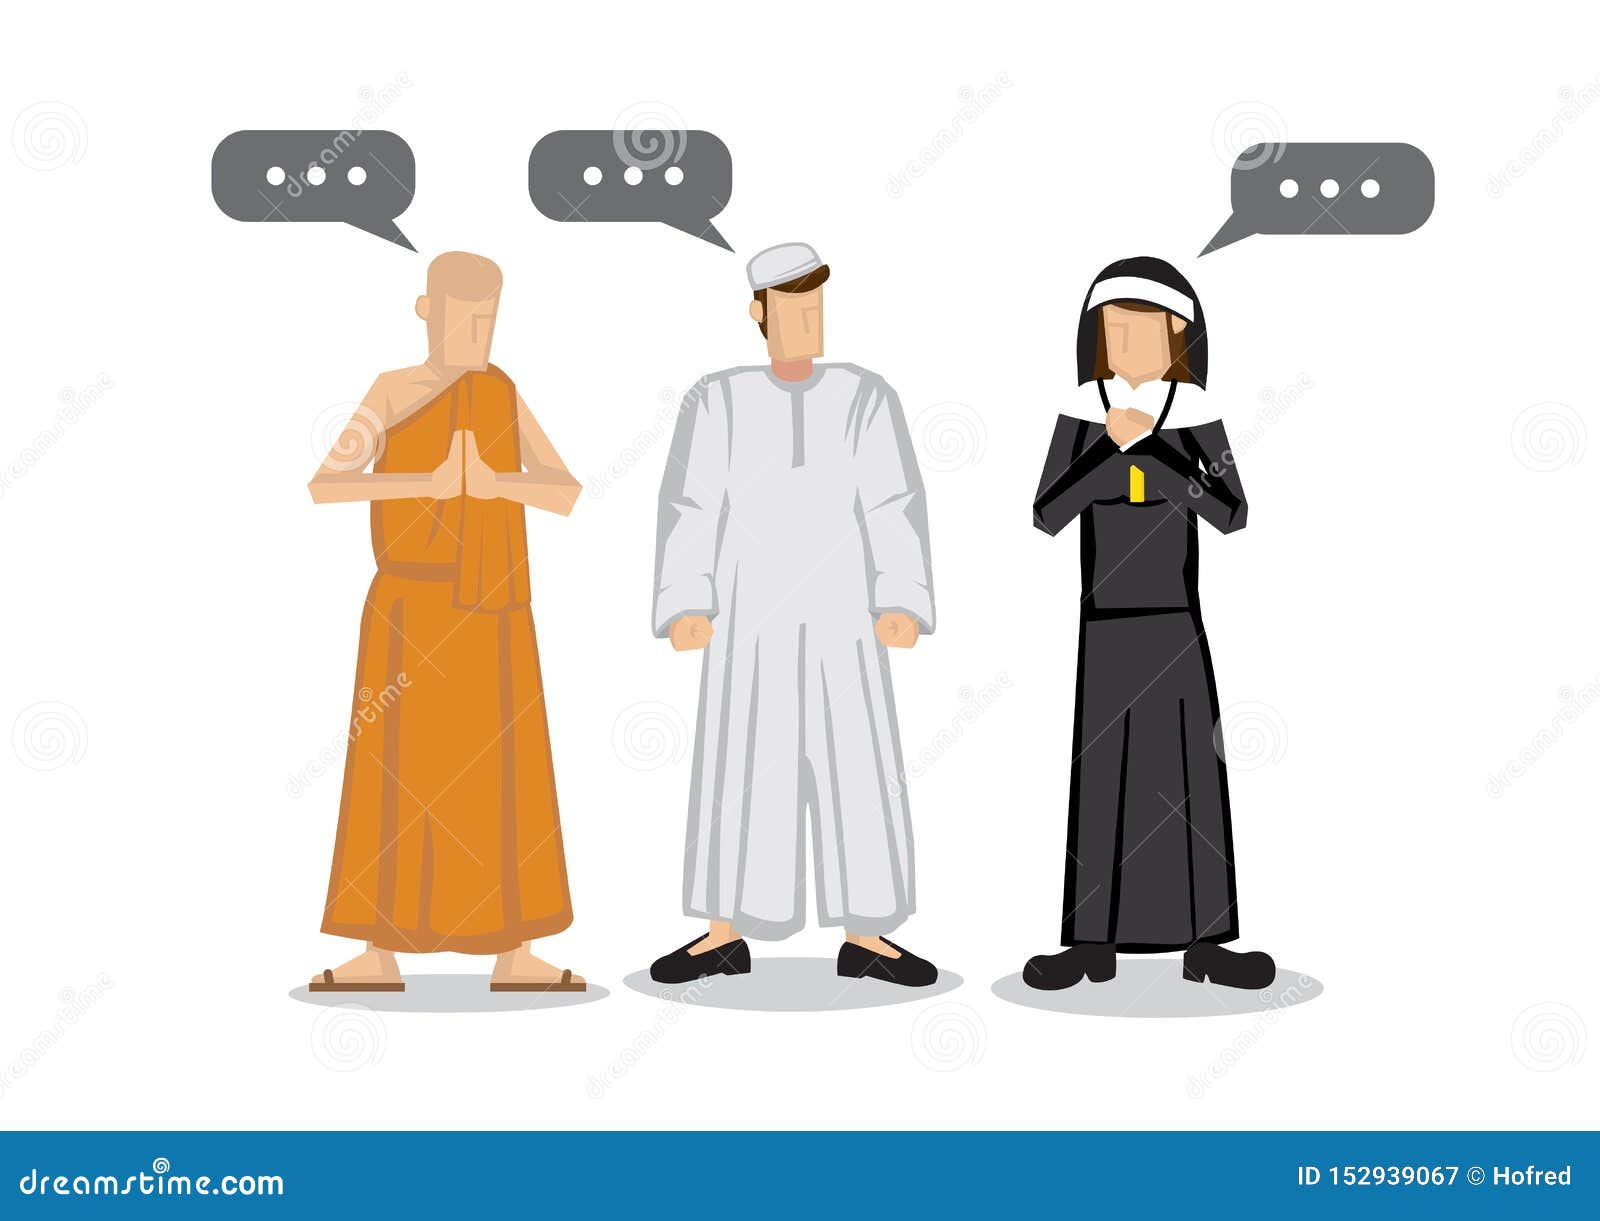 people of different religions. islam muslim, buddhism monk and a christianity nun. friendship and peace conversation between